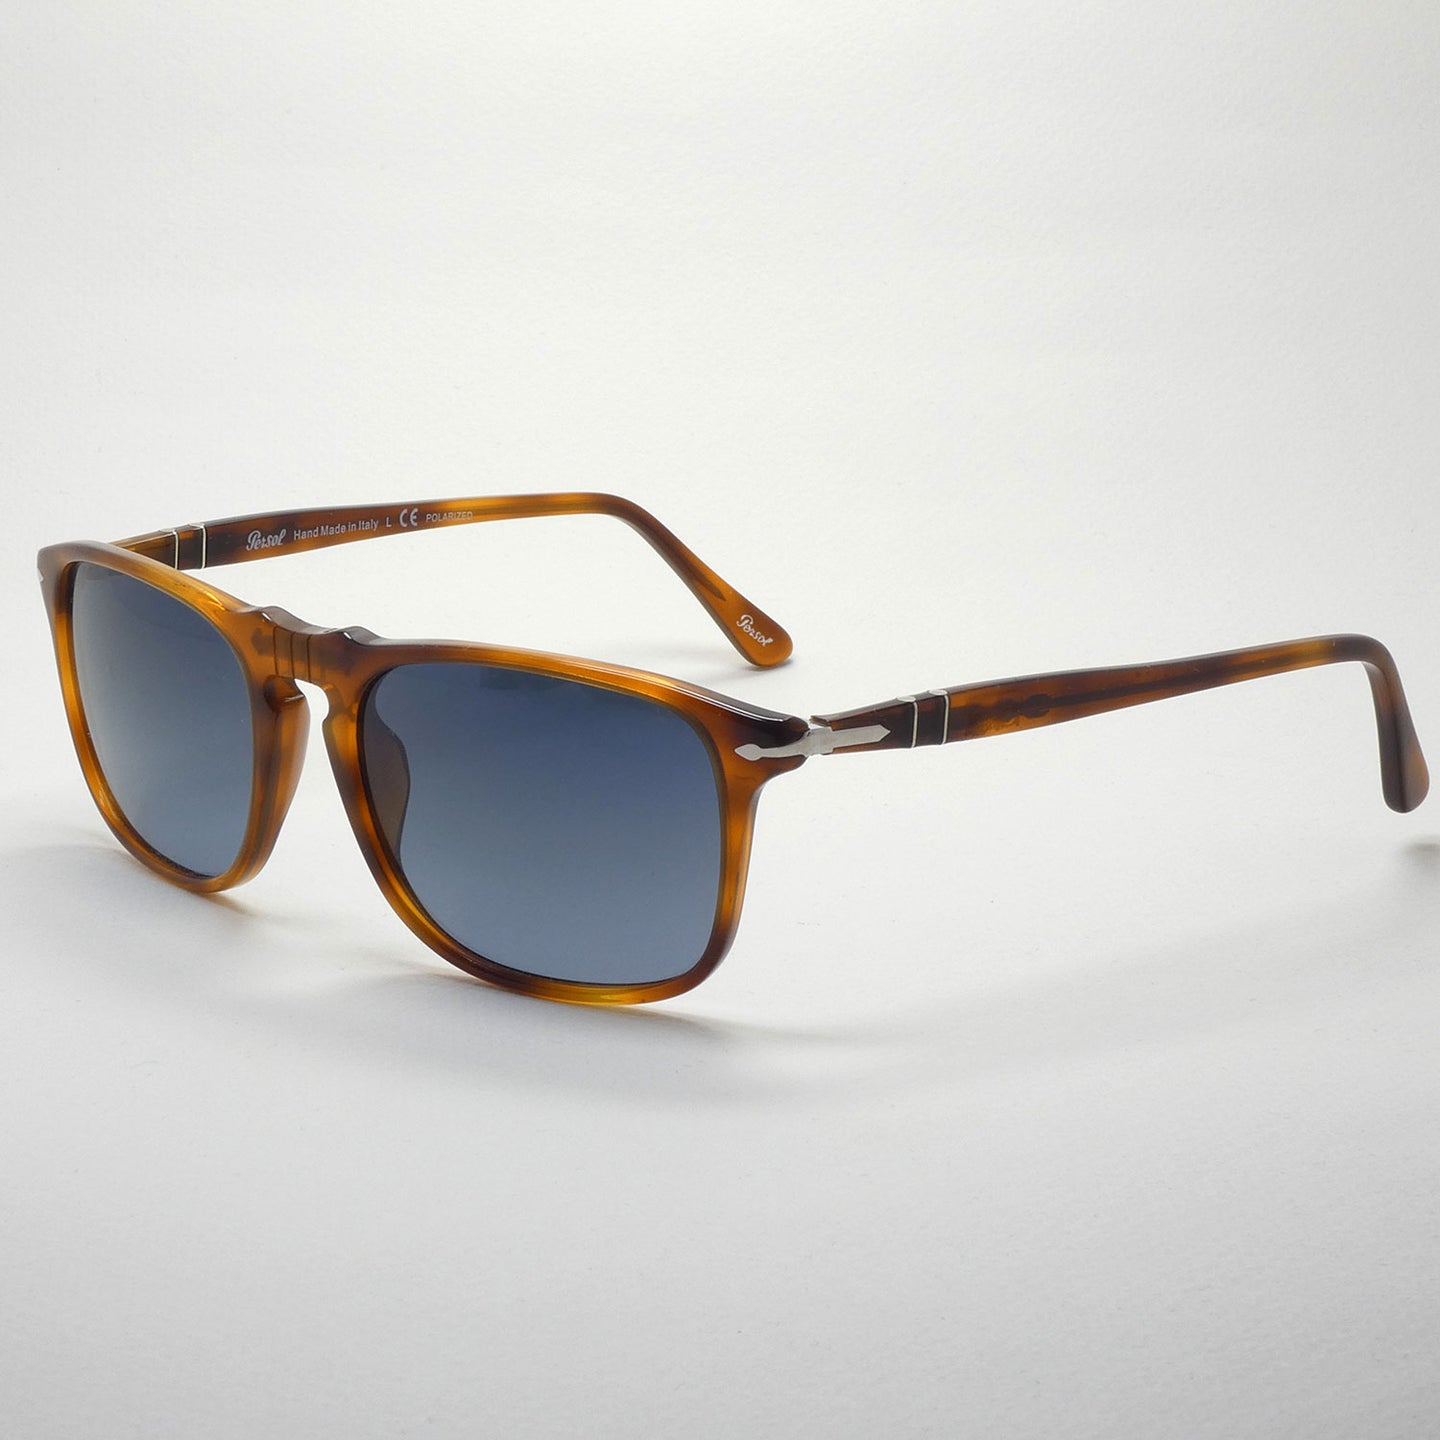 sunglasses persol 3059 96/S3 polarized  size 54 angled view